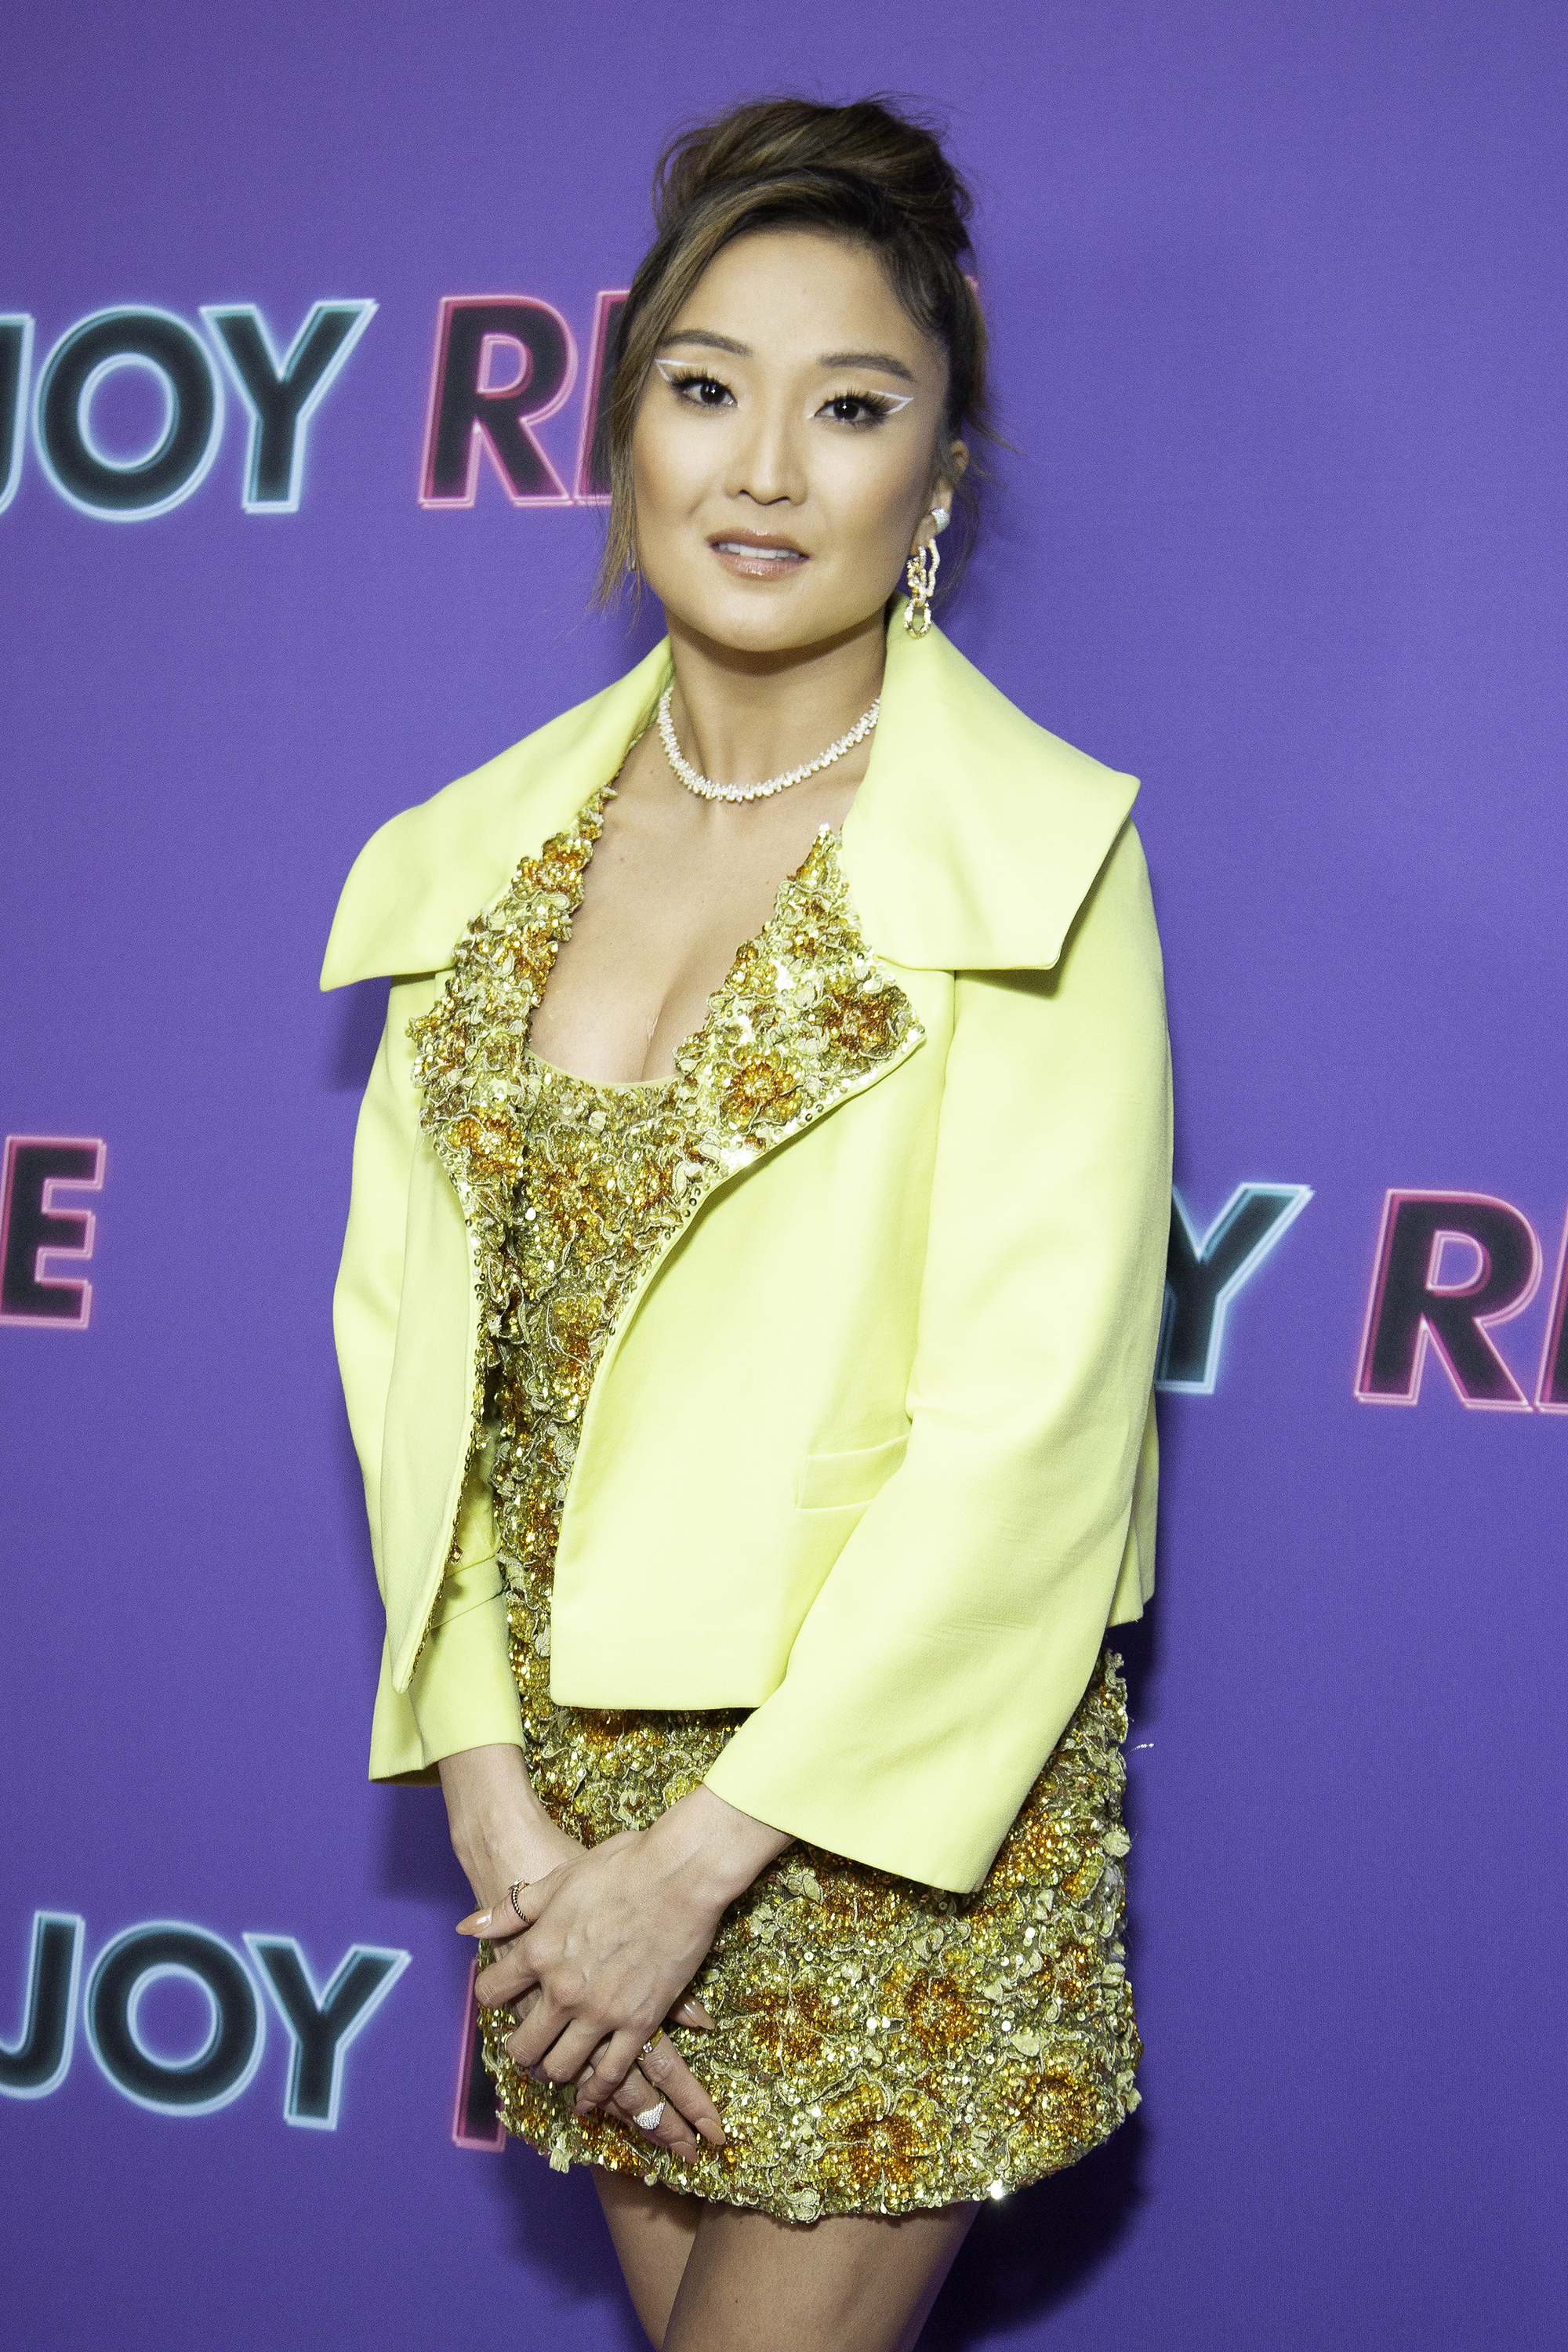 Ashley Park at the screening of "Joy Ride" on June 28, 2023, in New York City. | Source: Getty Images